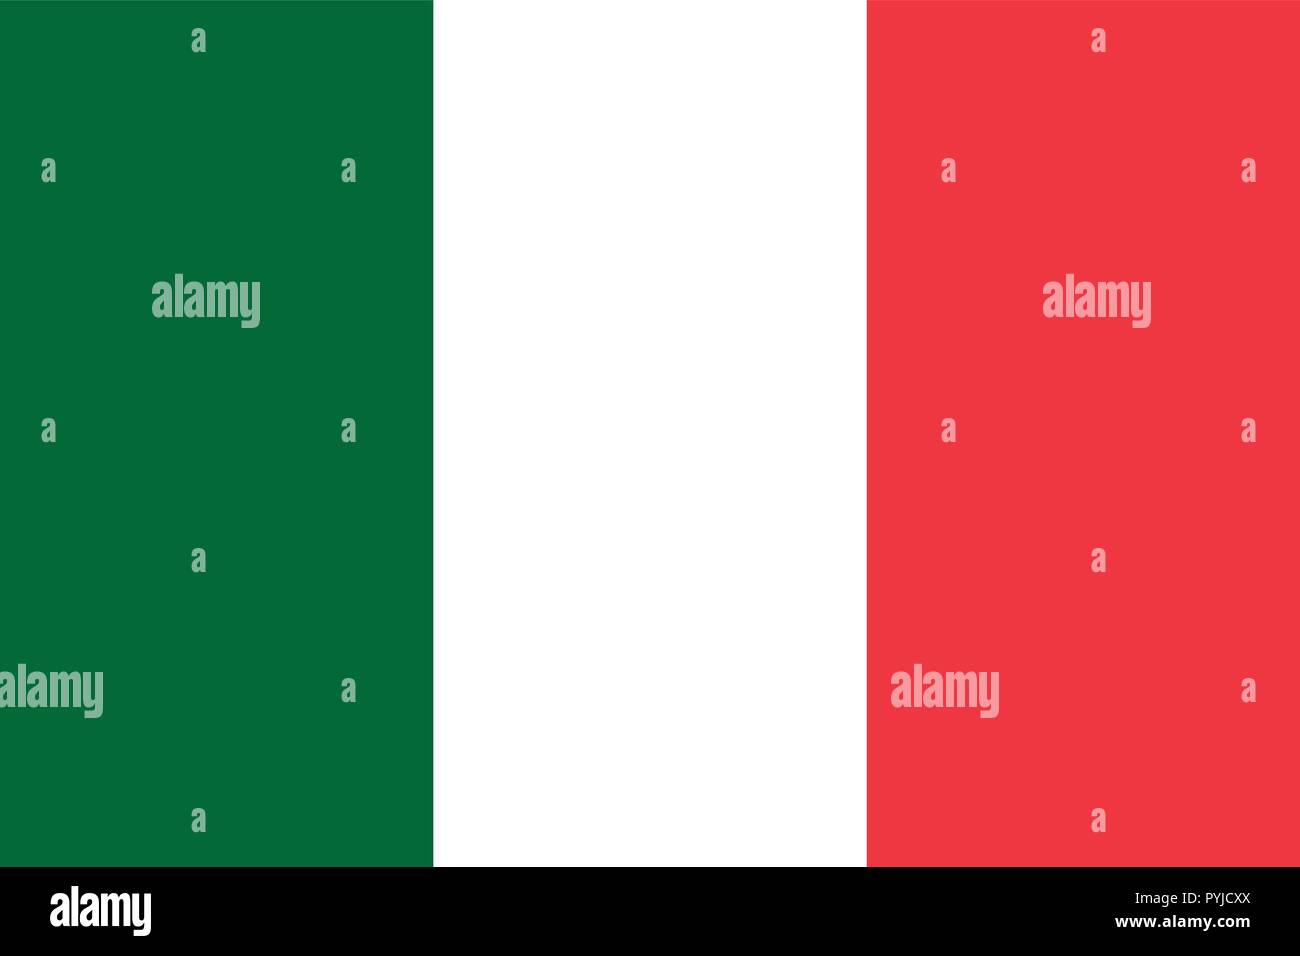 Vector image for Italy flag. Based on the official and exact Italian flag dimensions (3:2) & colors (349C, White and 032C) Stock Vector